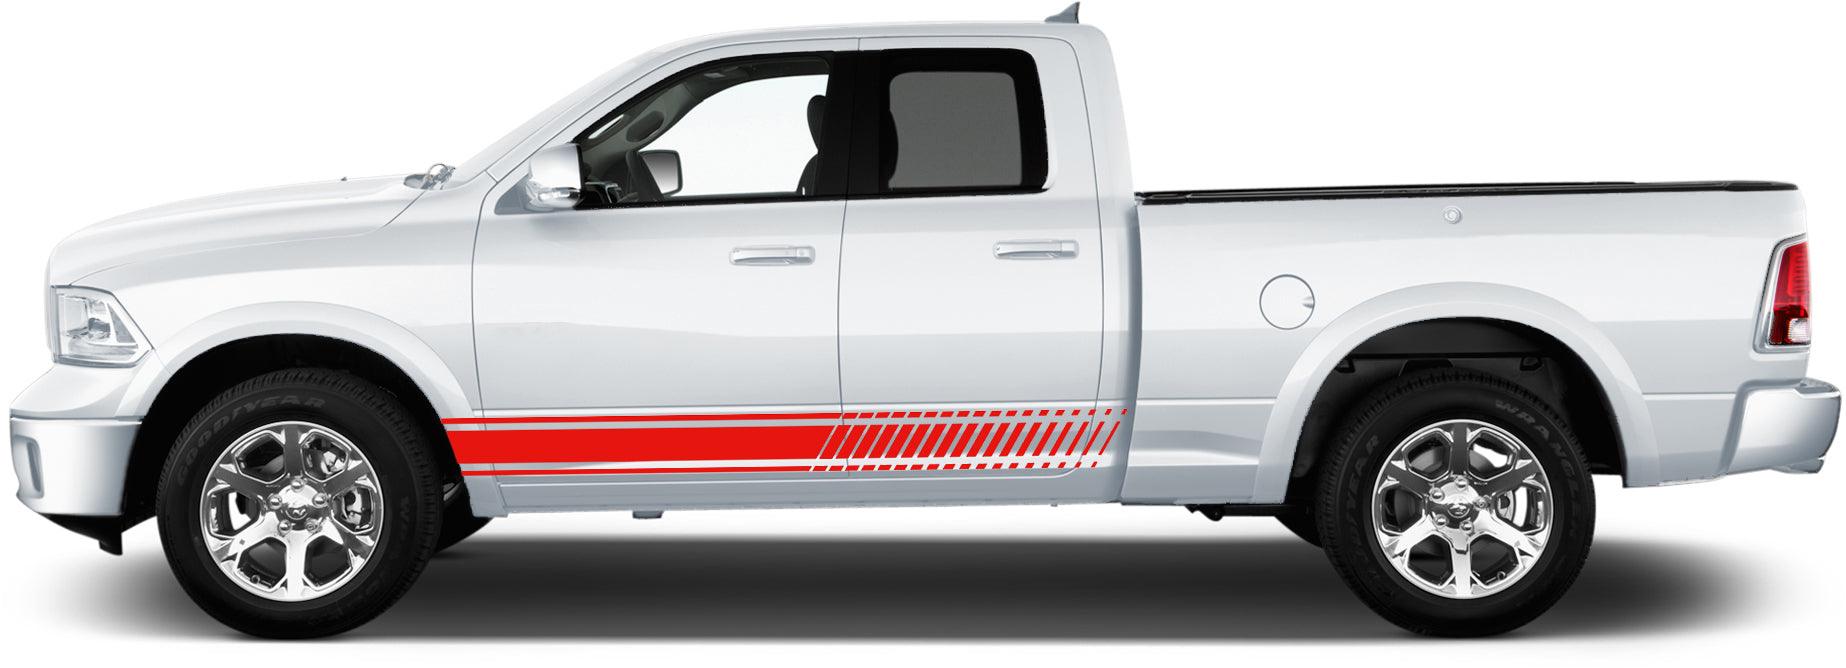 Dodge Ram 1500/2500/3500 (2009-2018) Custom Vinyl Decals, Graphics and Stickers - Side Stripes (Pair) - Jkprostickers